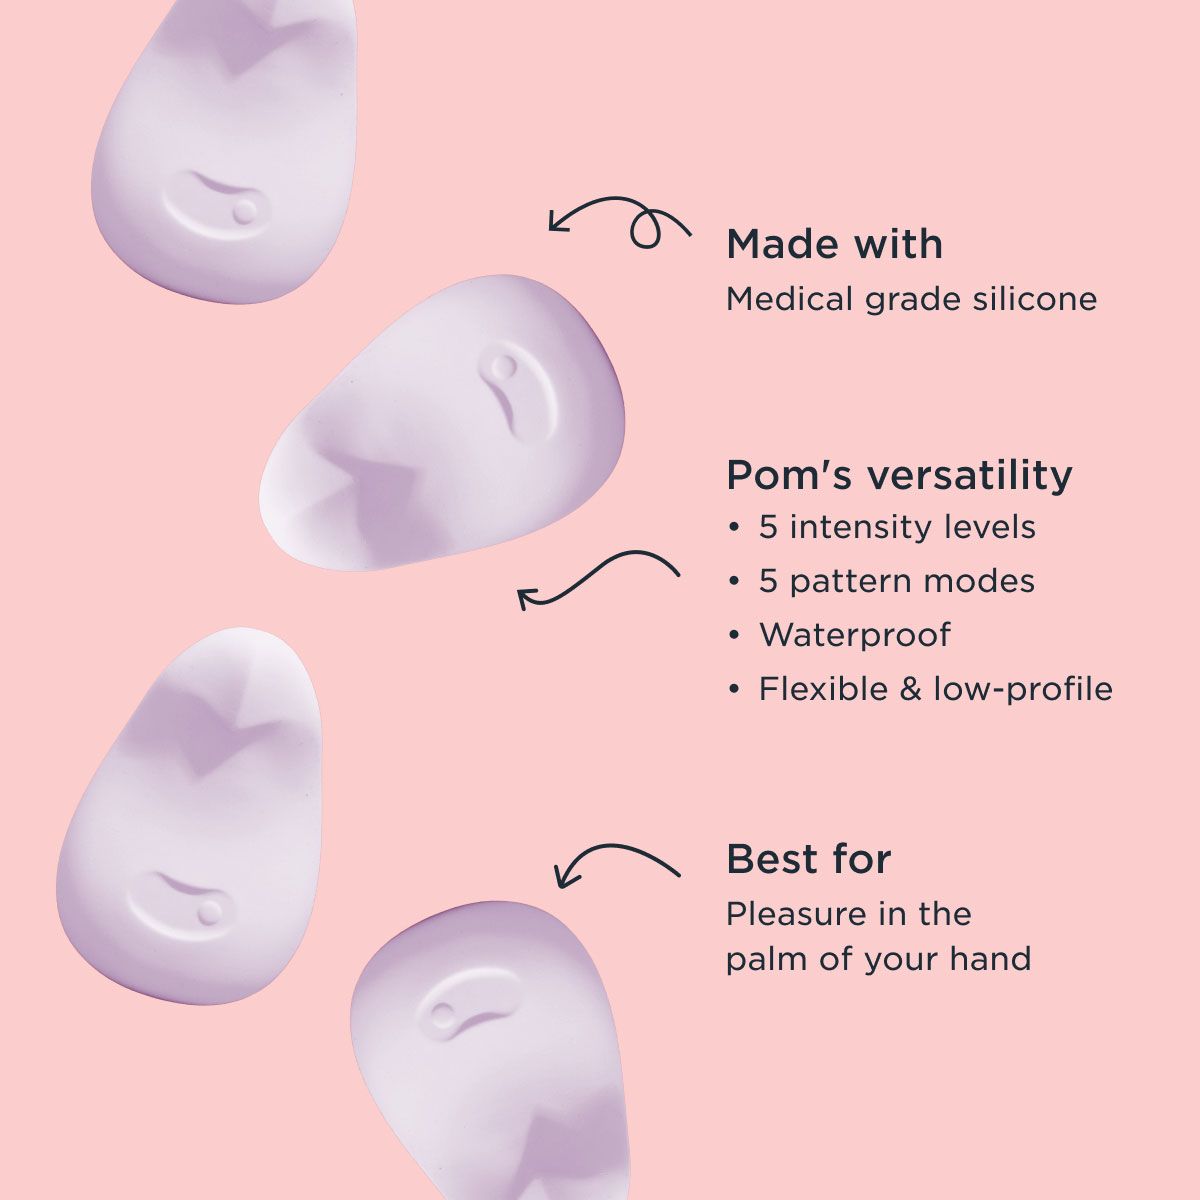 Graphic featuring Dame Pom Flexible Vibrator and info about the product on a pink background